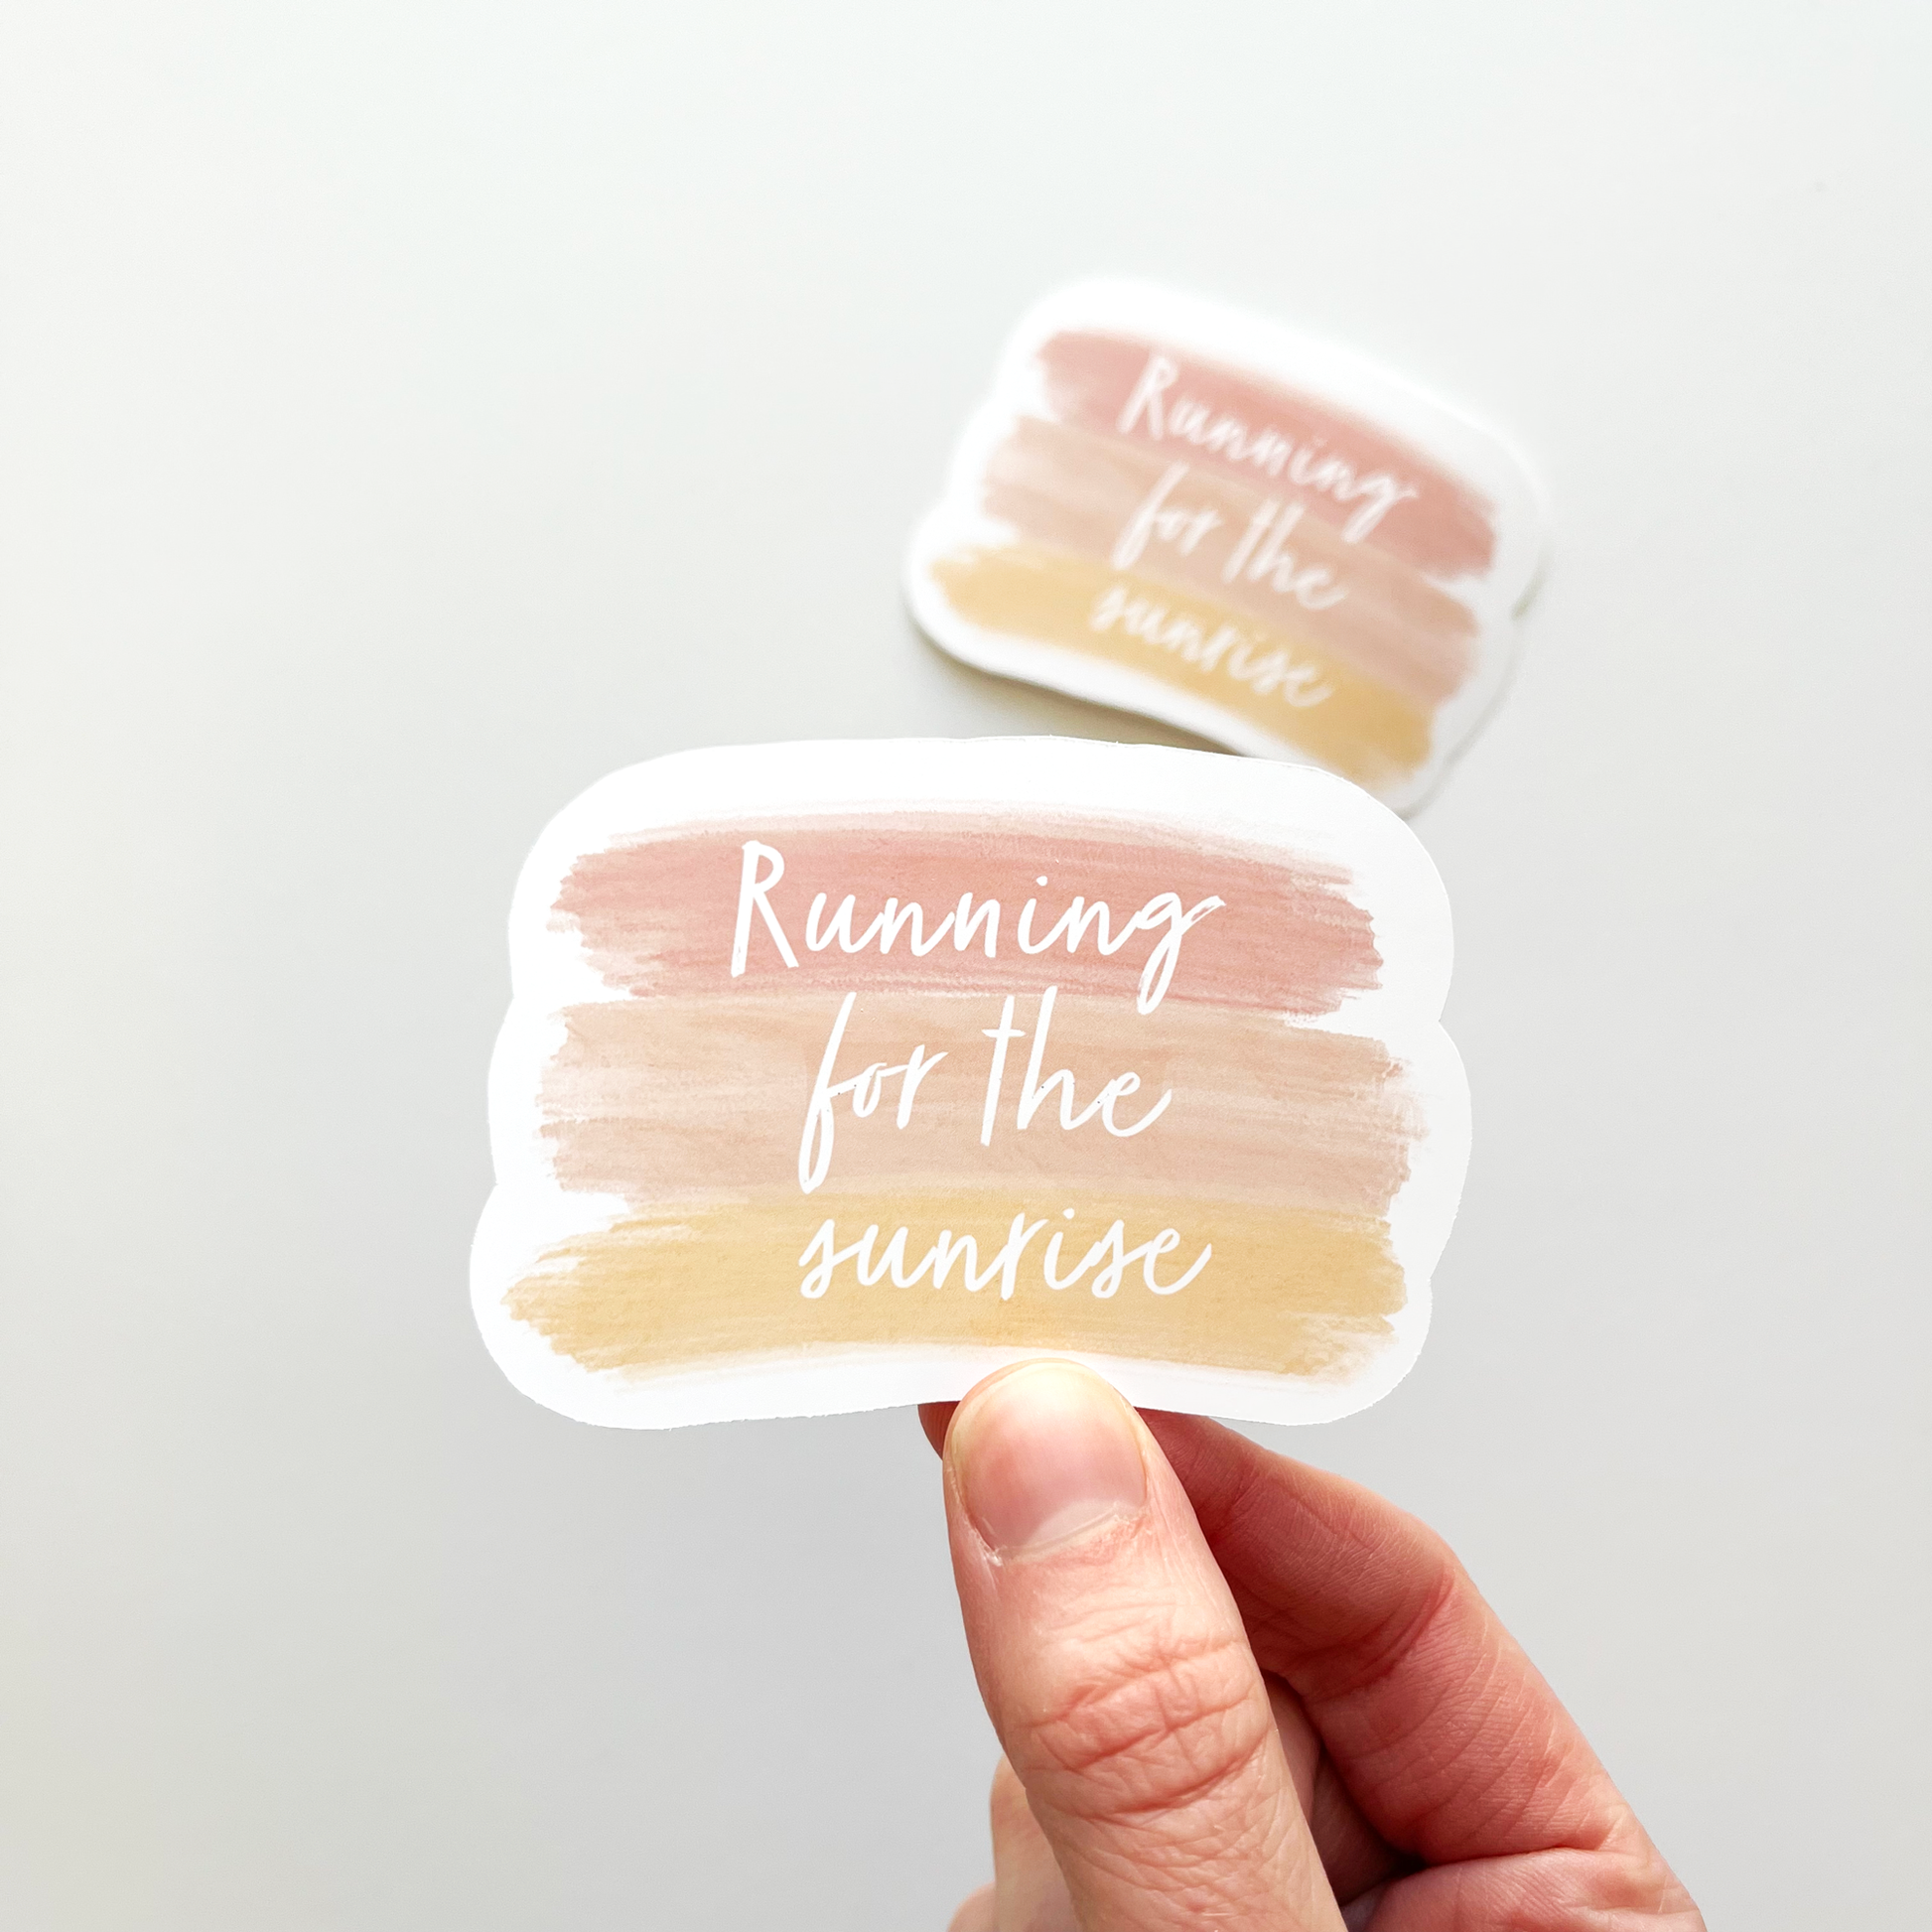 Running for the sunrise sticker in white text with paint strokes as the background in colors of pink and yellow